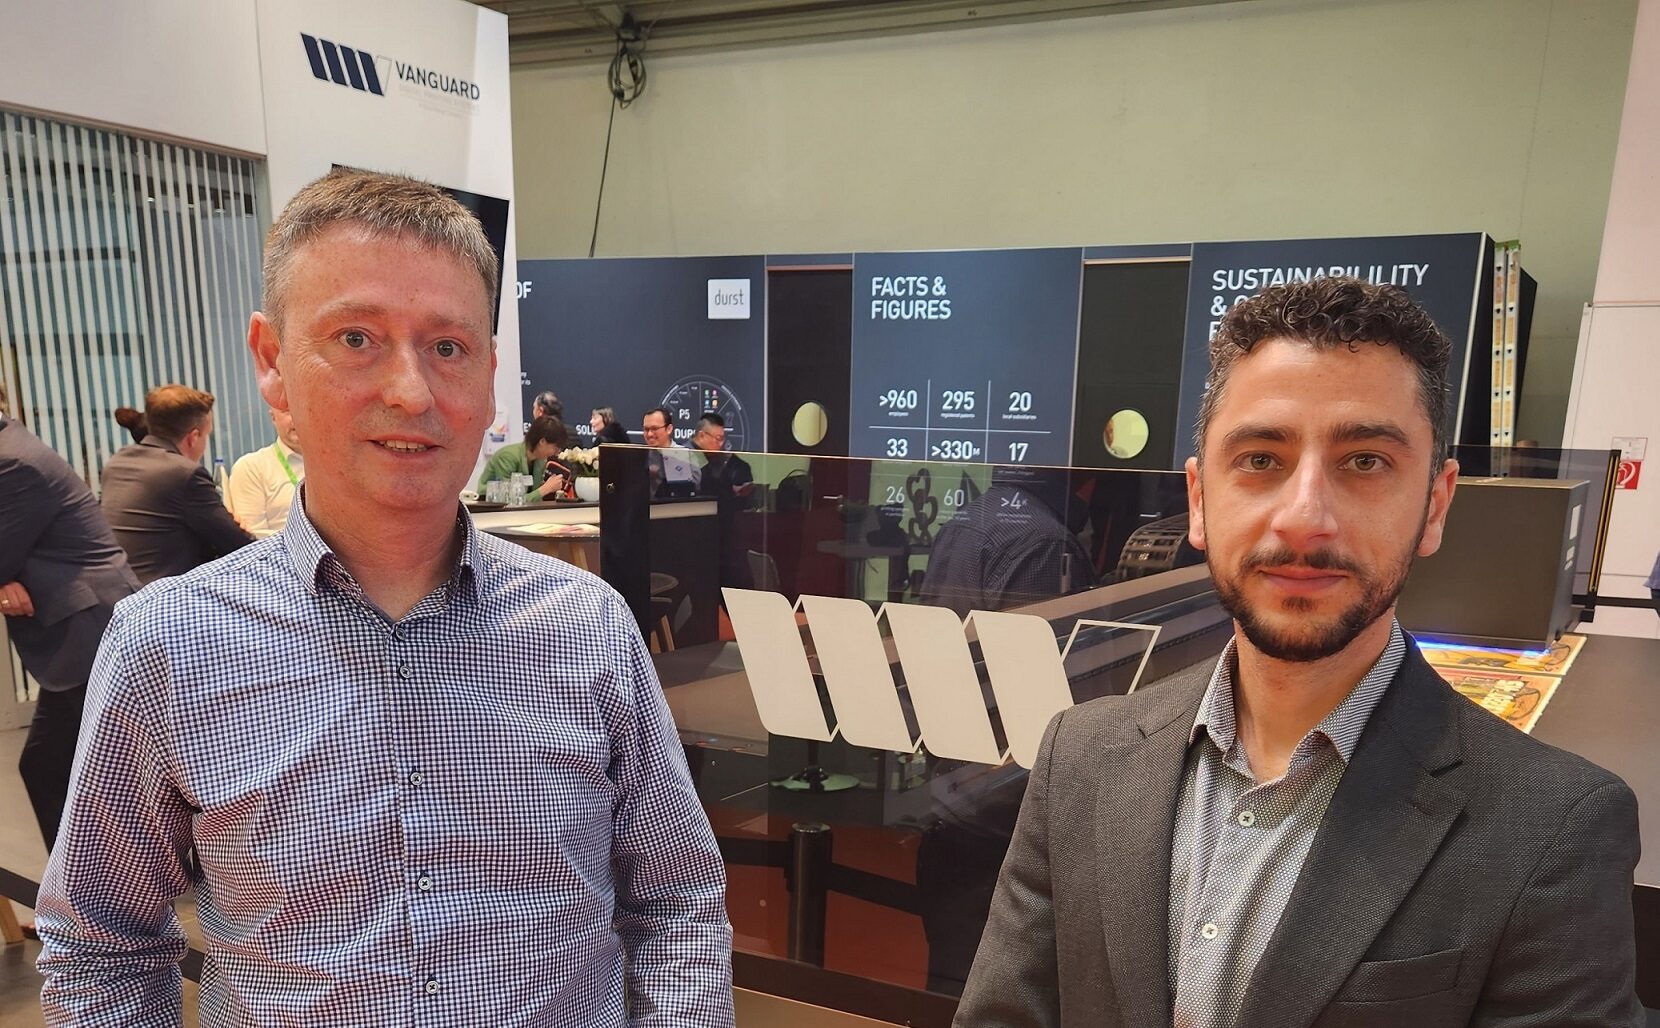 Declan Kelly (left) and Yiannis Apostolidis pictured at FESPA